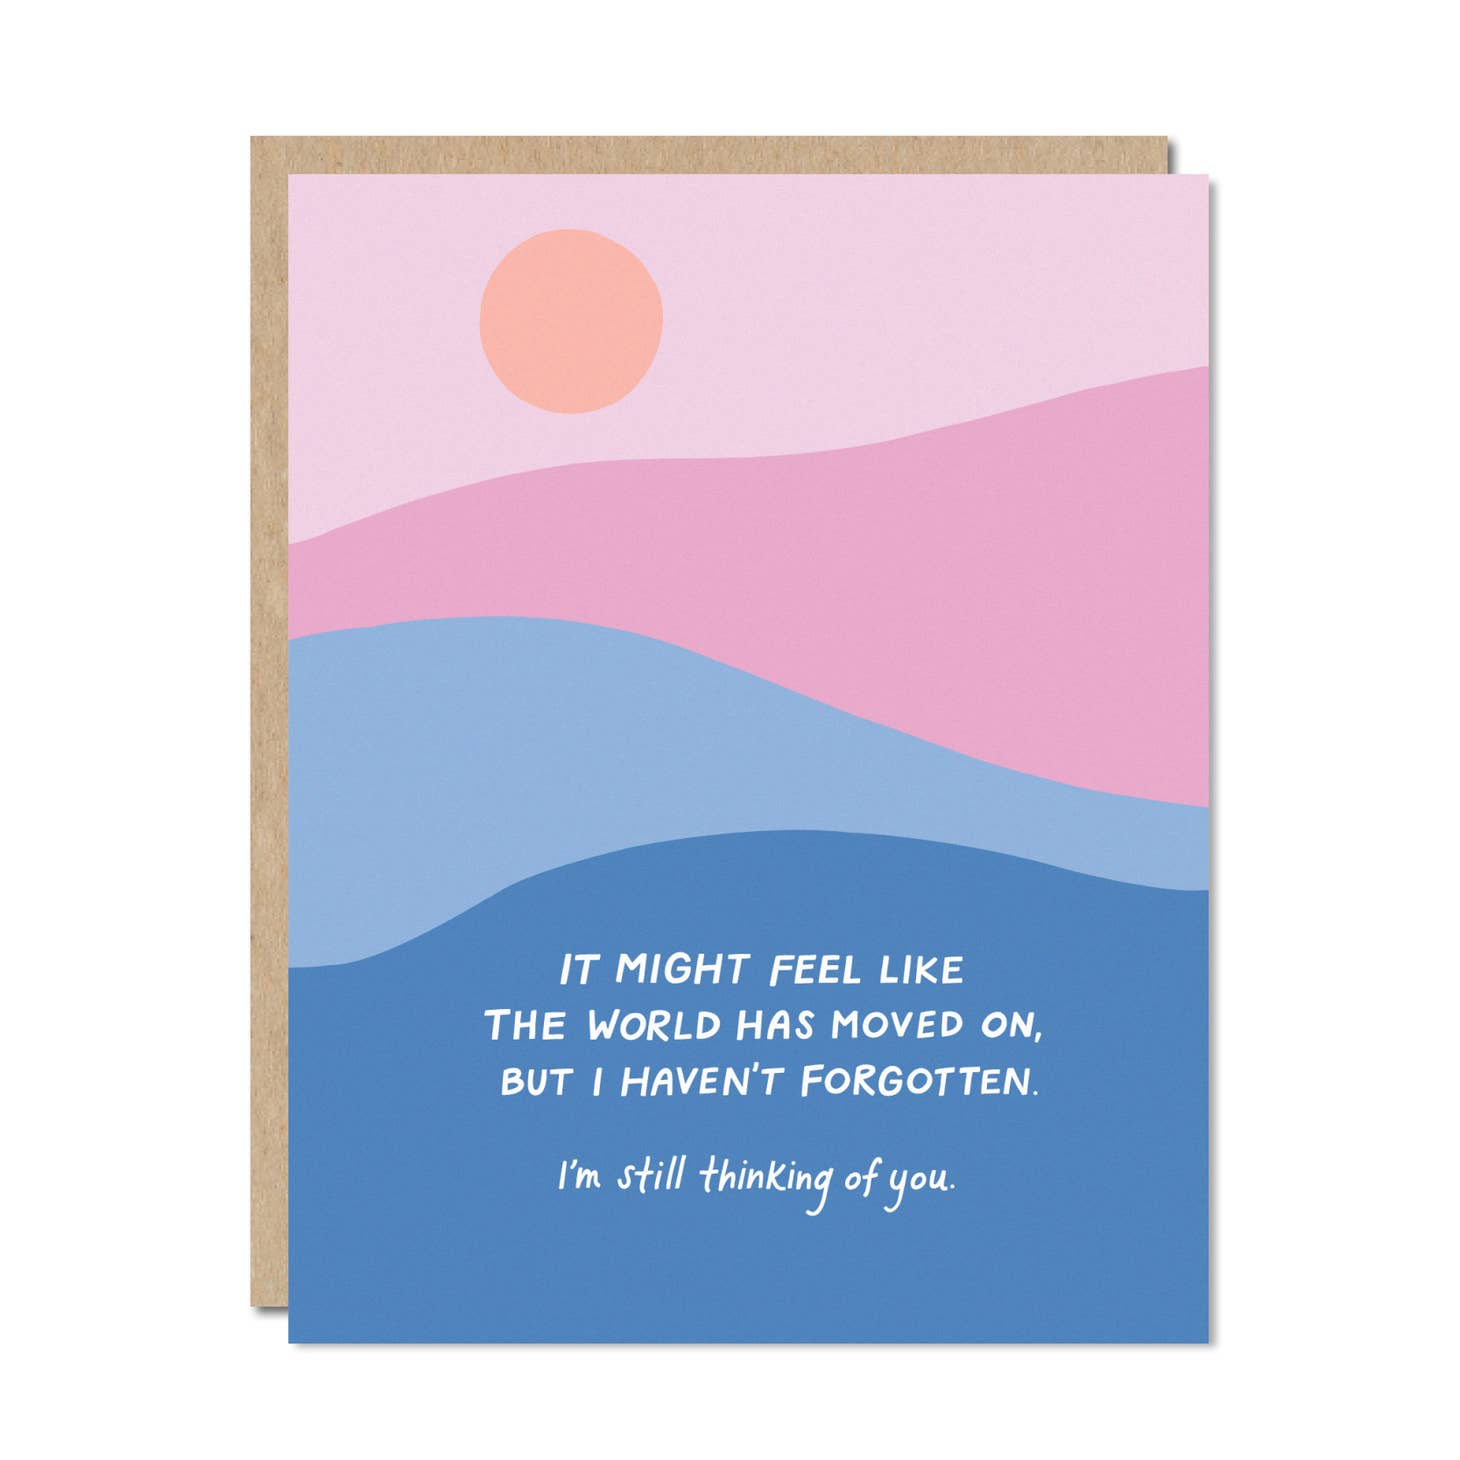 Pink and blue waves of color with peach sun and white text says, “It might feel like the world has moved on, but I haven’t forgotten, I’m still thinking of you.”. Kraft envelope included. 